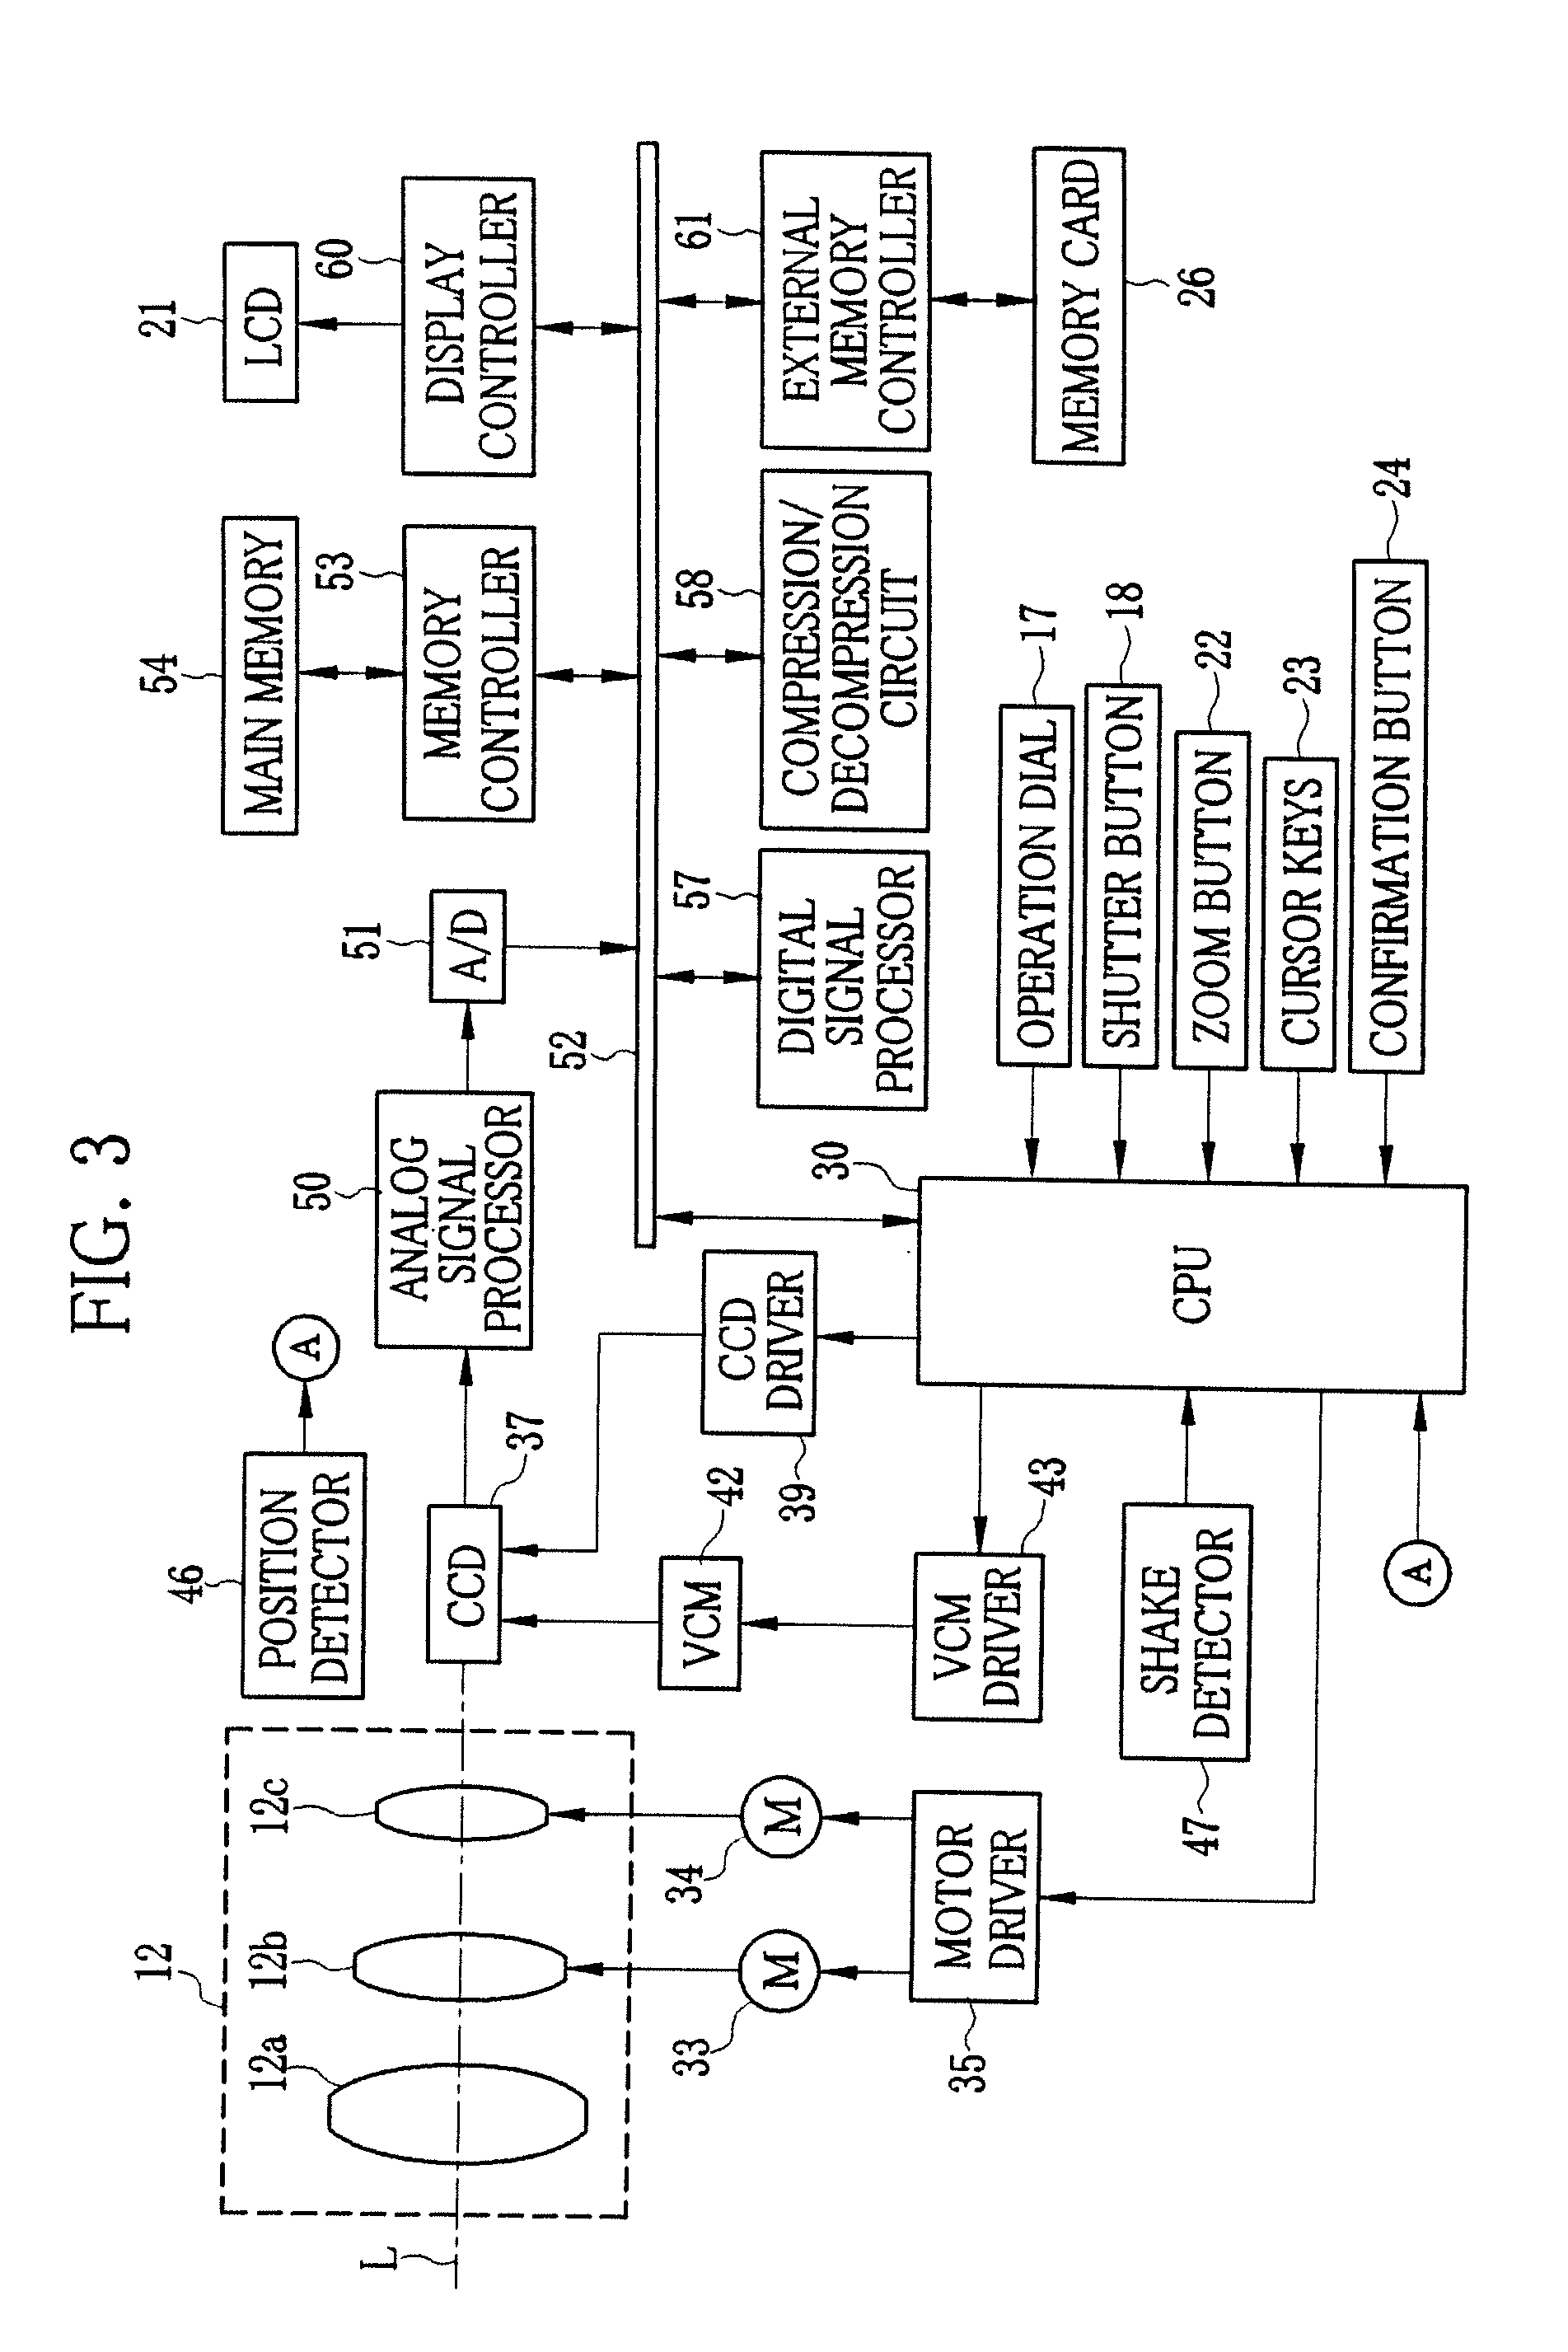 Image stabilizer for optical instrument